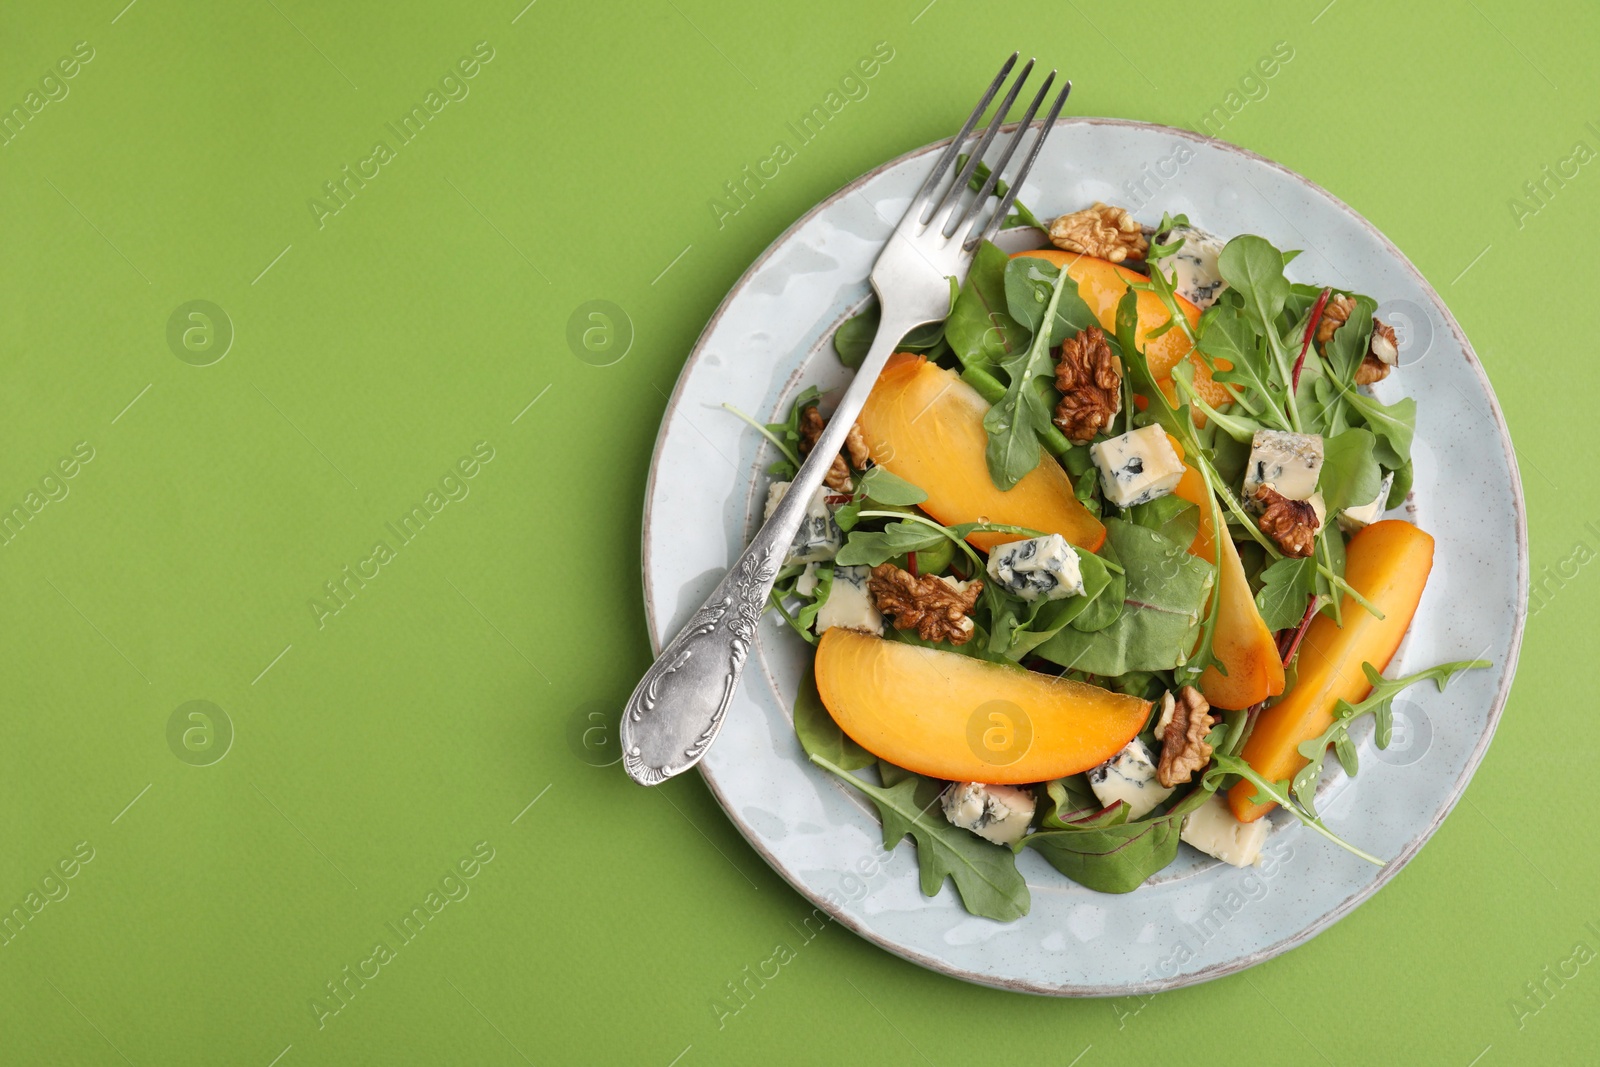 Photo of Tasty salad with persimmon, blue cheese and walnuts served on light green background, top view. Space for text